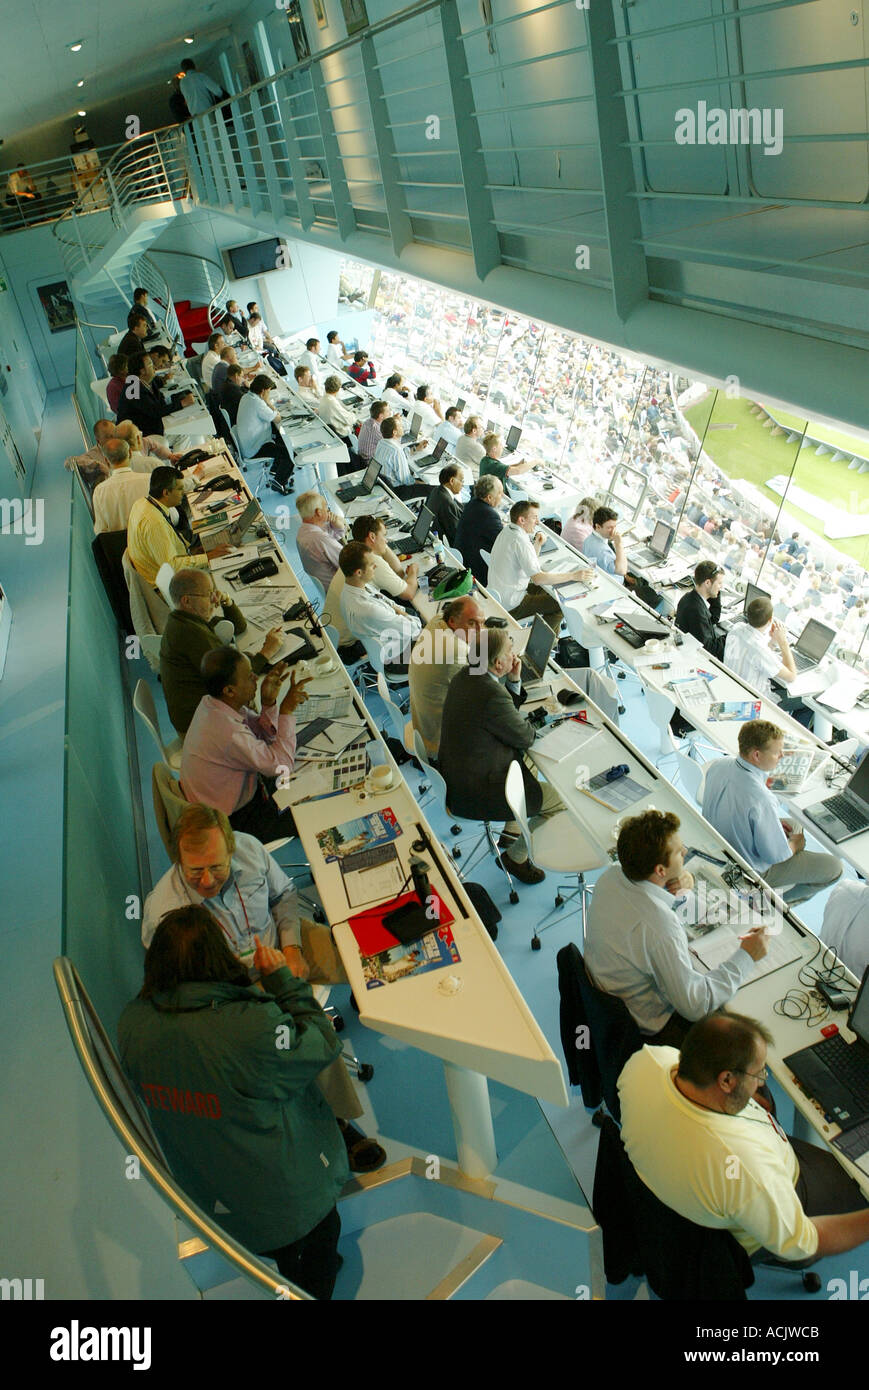 Journalists at work inside the media centre at Lords cricket ground London Stock Photo